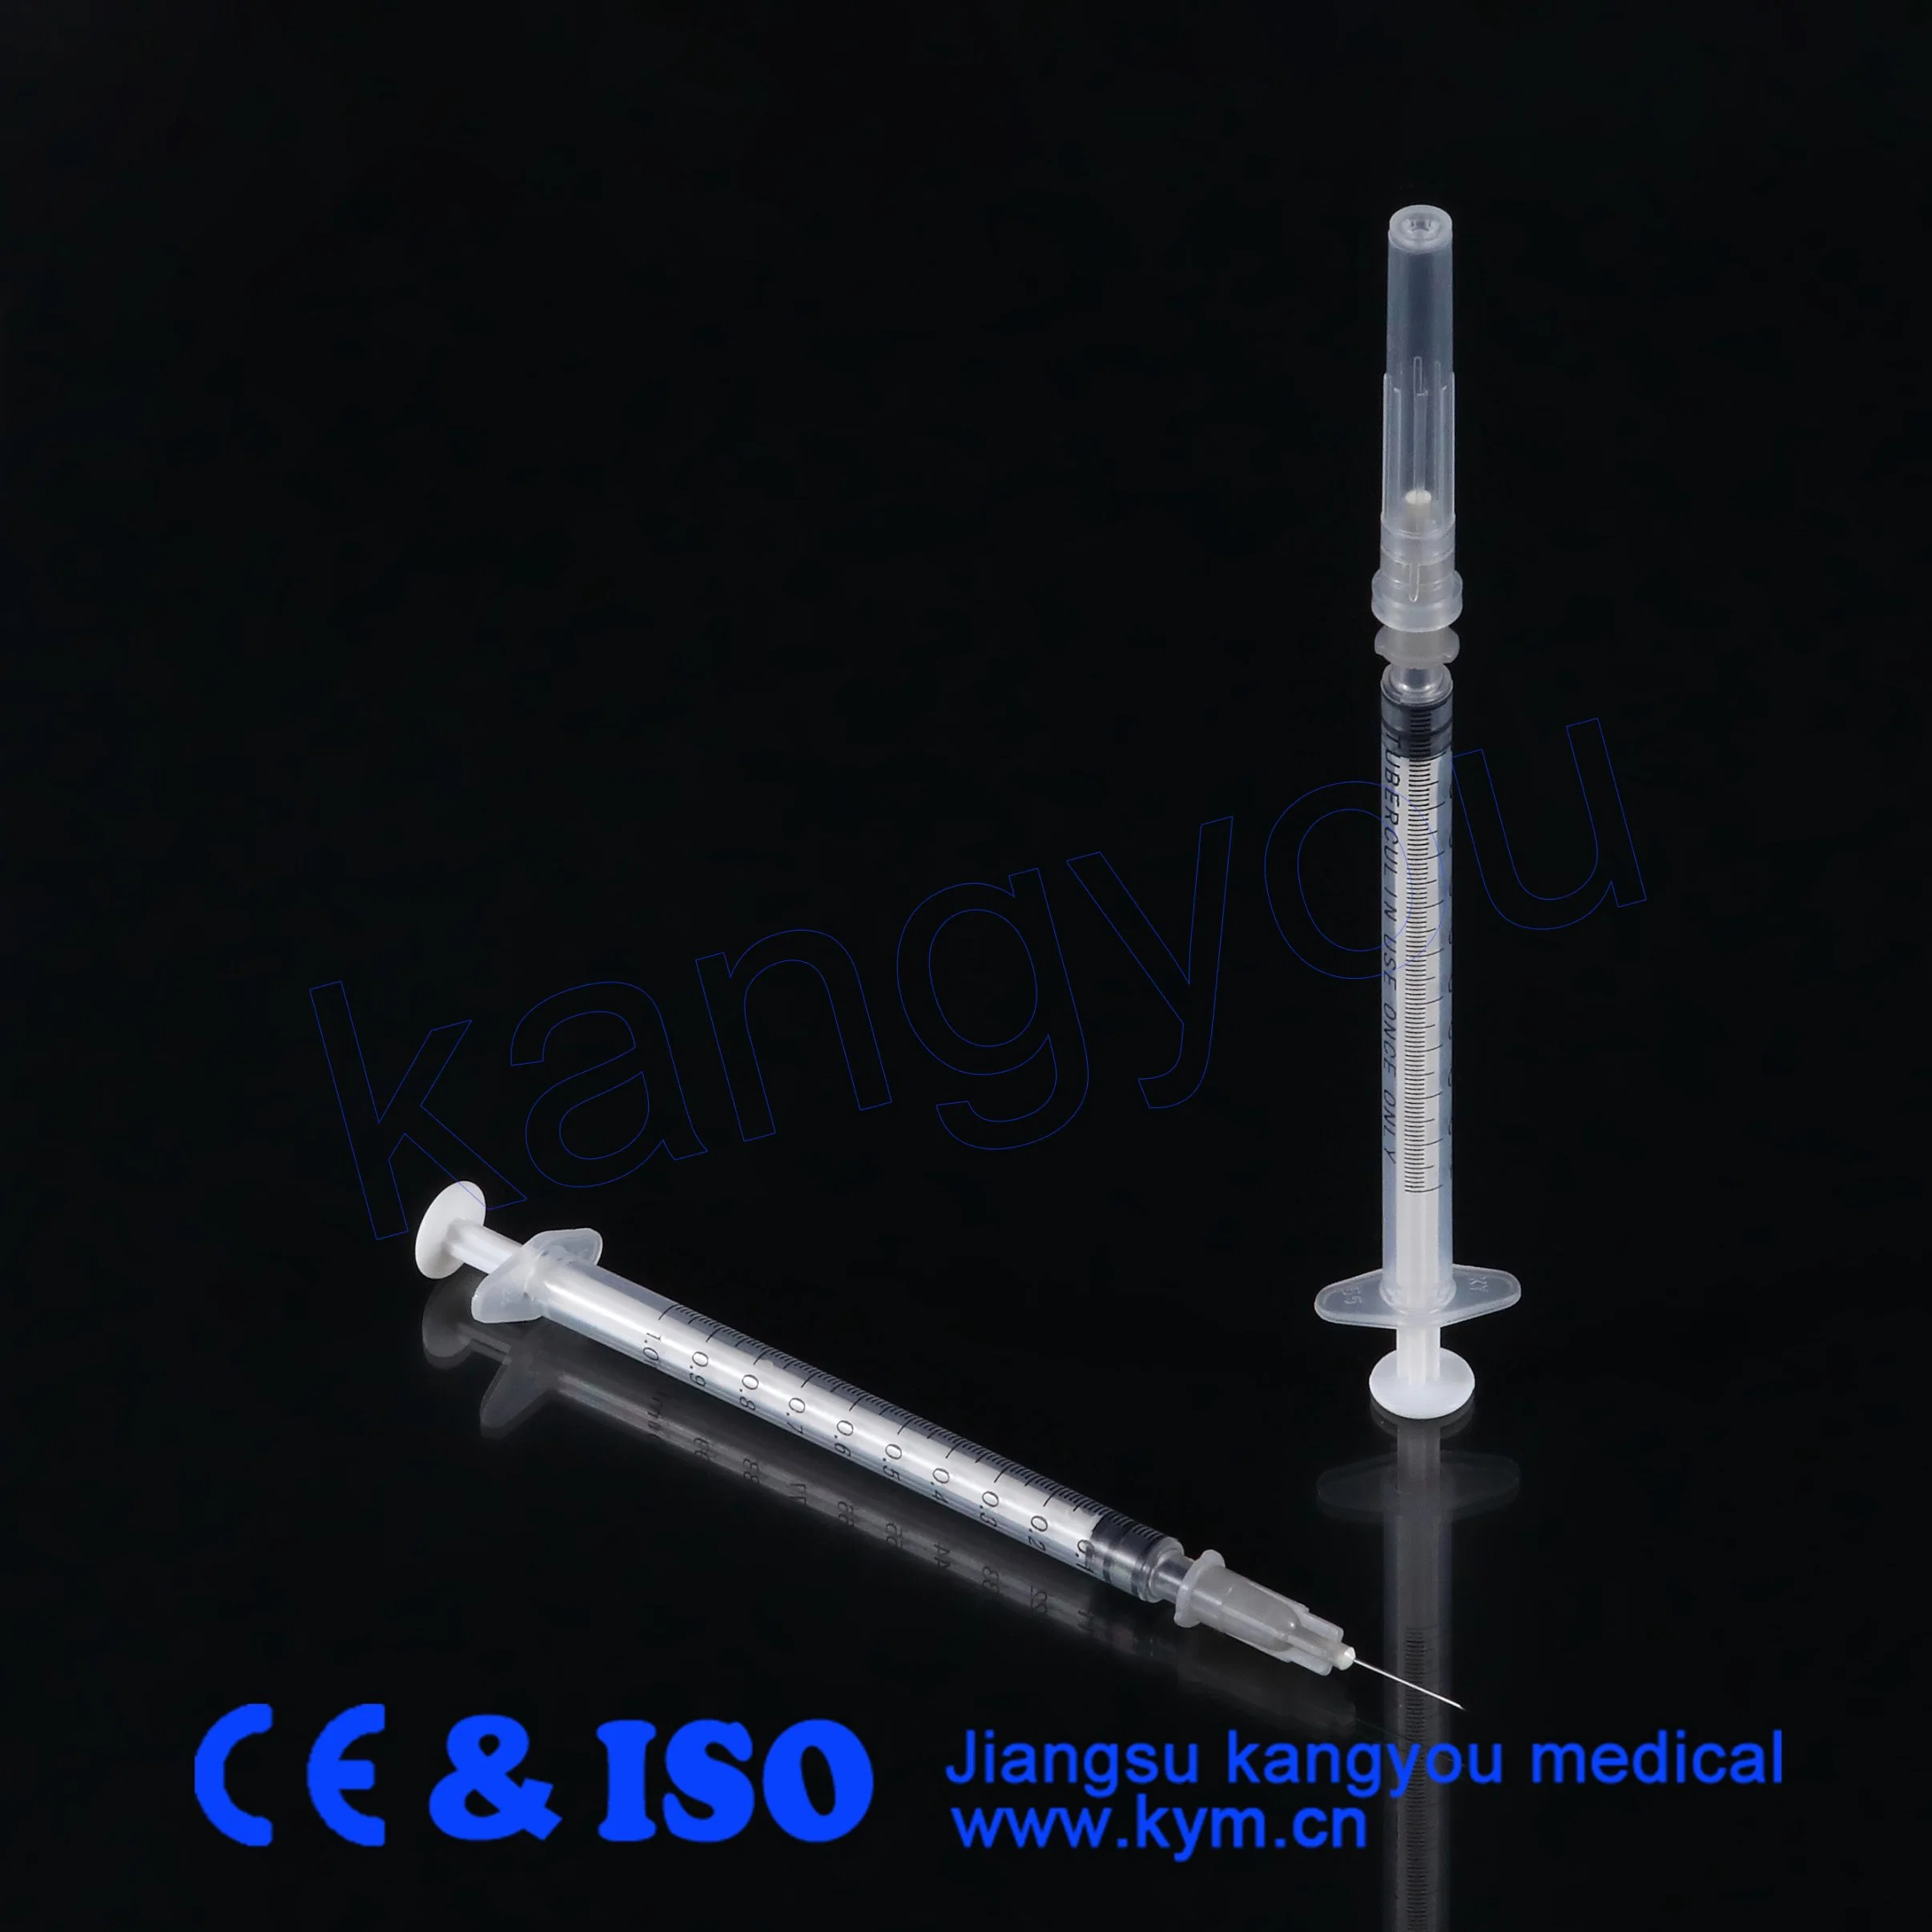 China Wholesale/Supplier Medical Instrument Sterile Hypodermic 3-Part Syringes with Needles Luer Slip and Luer Lock